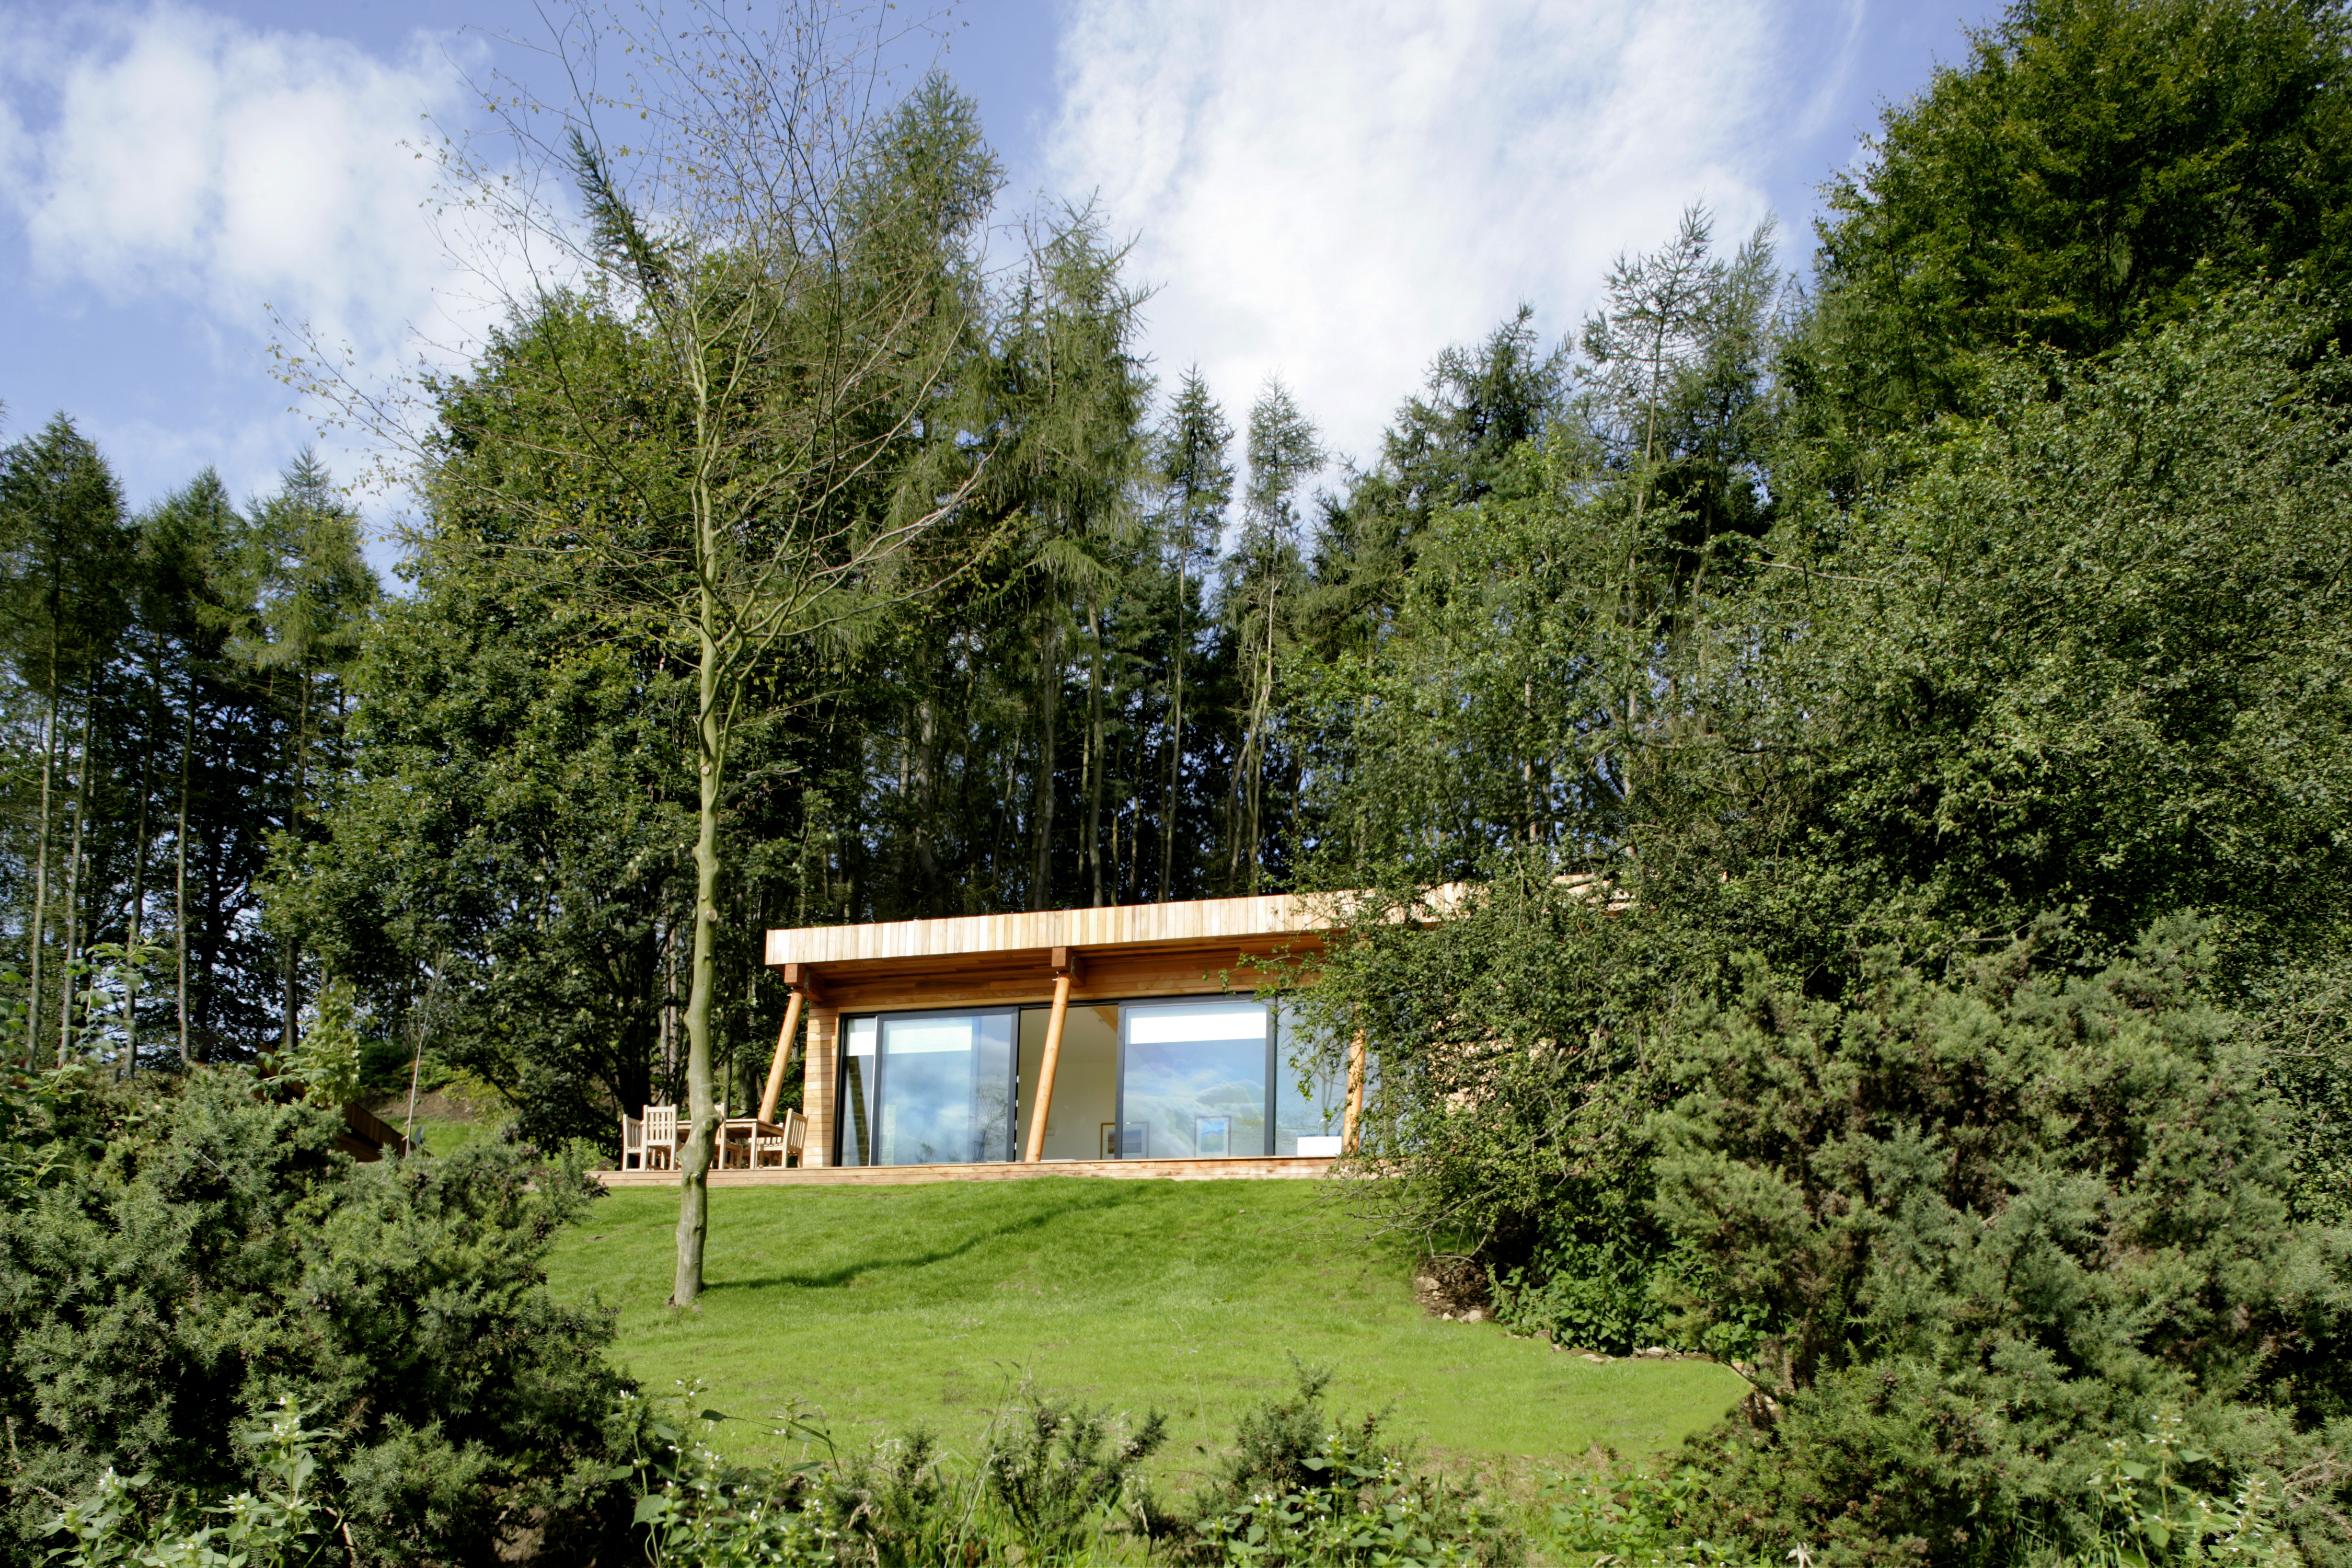 Natural Retreats, Yorkshire Dales, ecolodges for a relaxing family countryside retreat